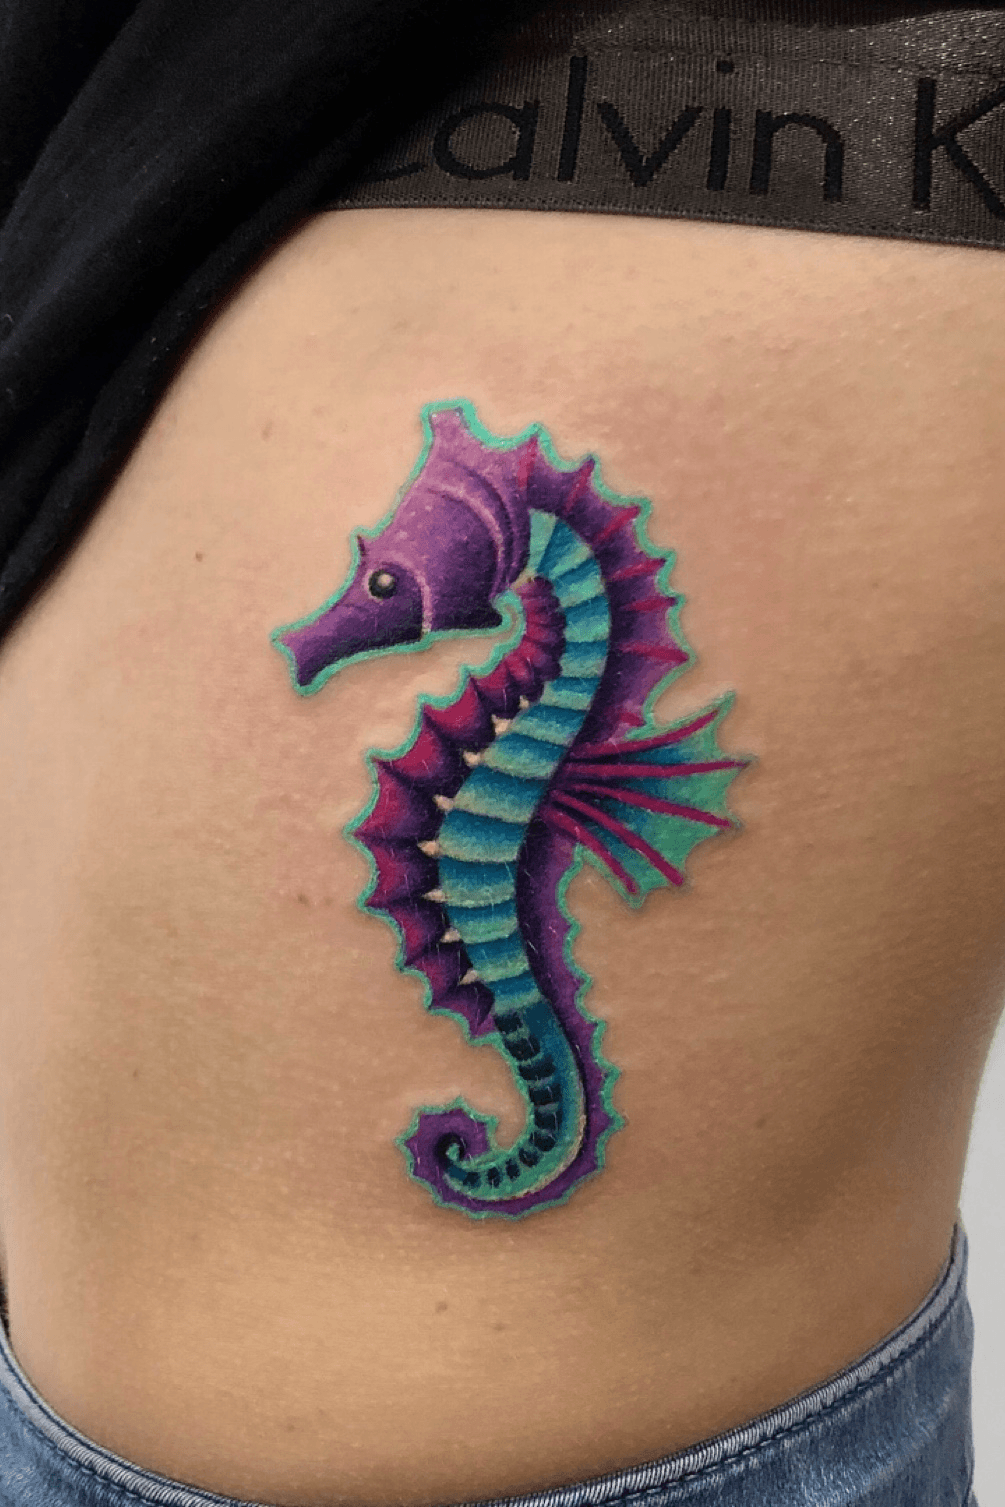 Seahorse Tattoo Design Images Seahorse Ink Design Ideas  Seahorse tattoo  Tattoos for daughters Tattoos for women